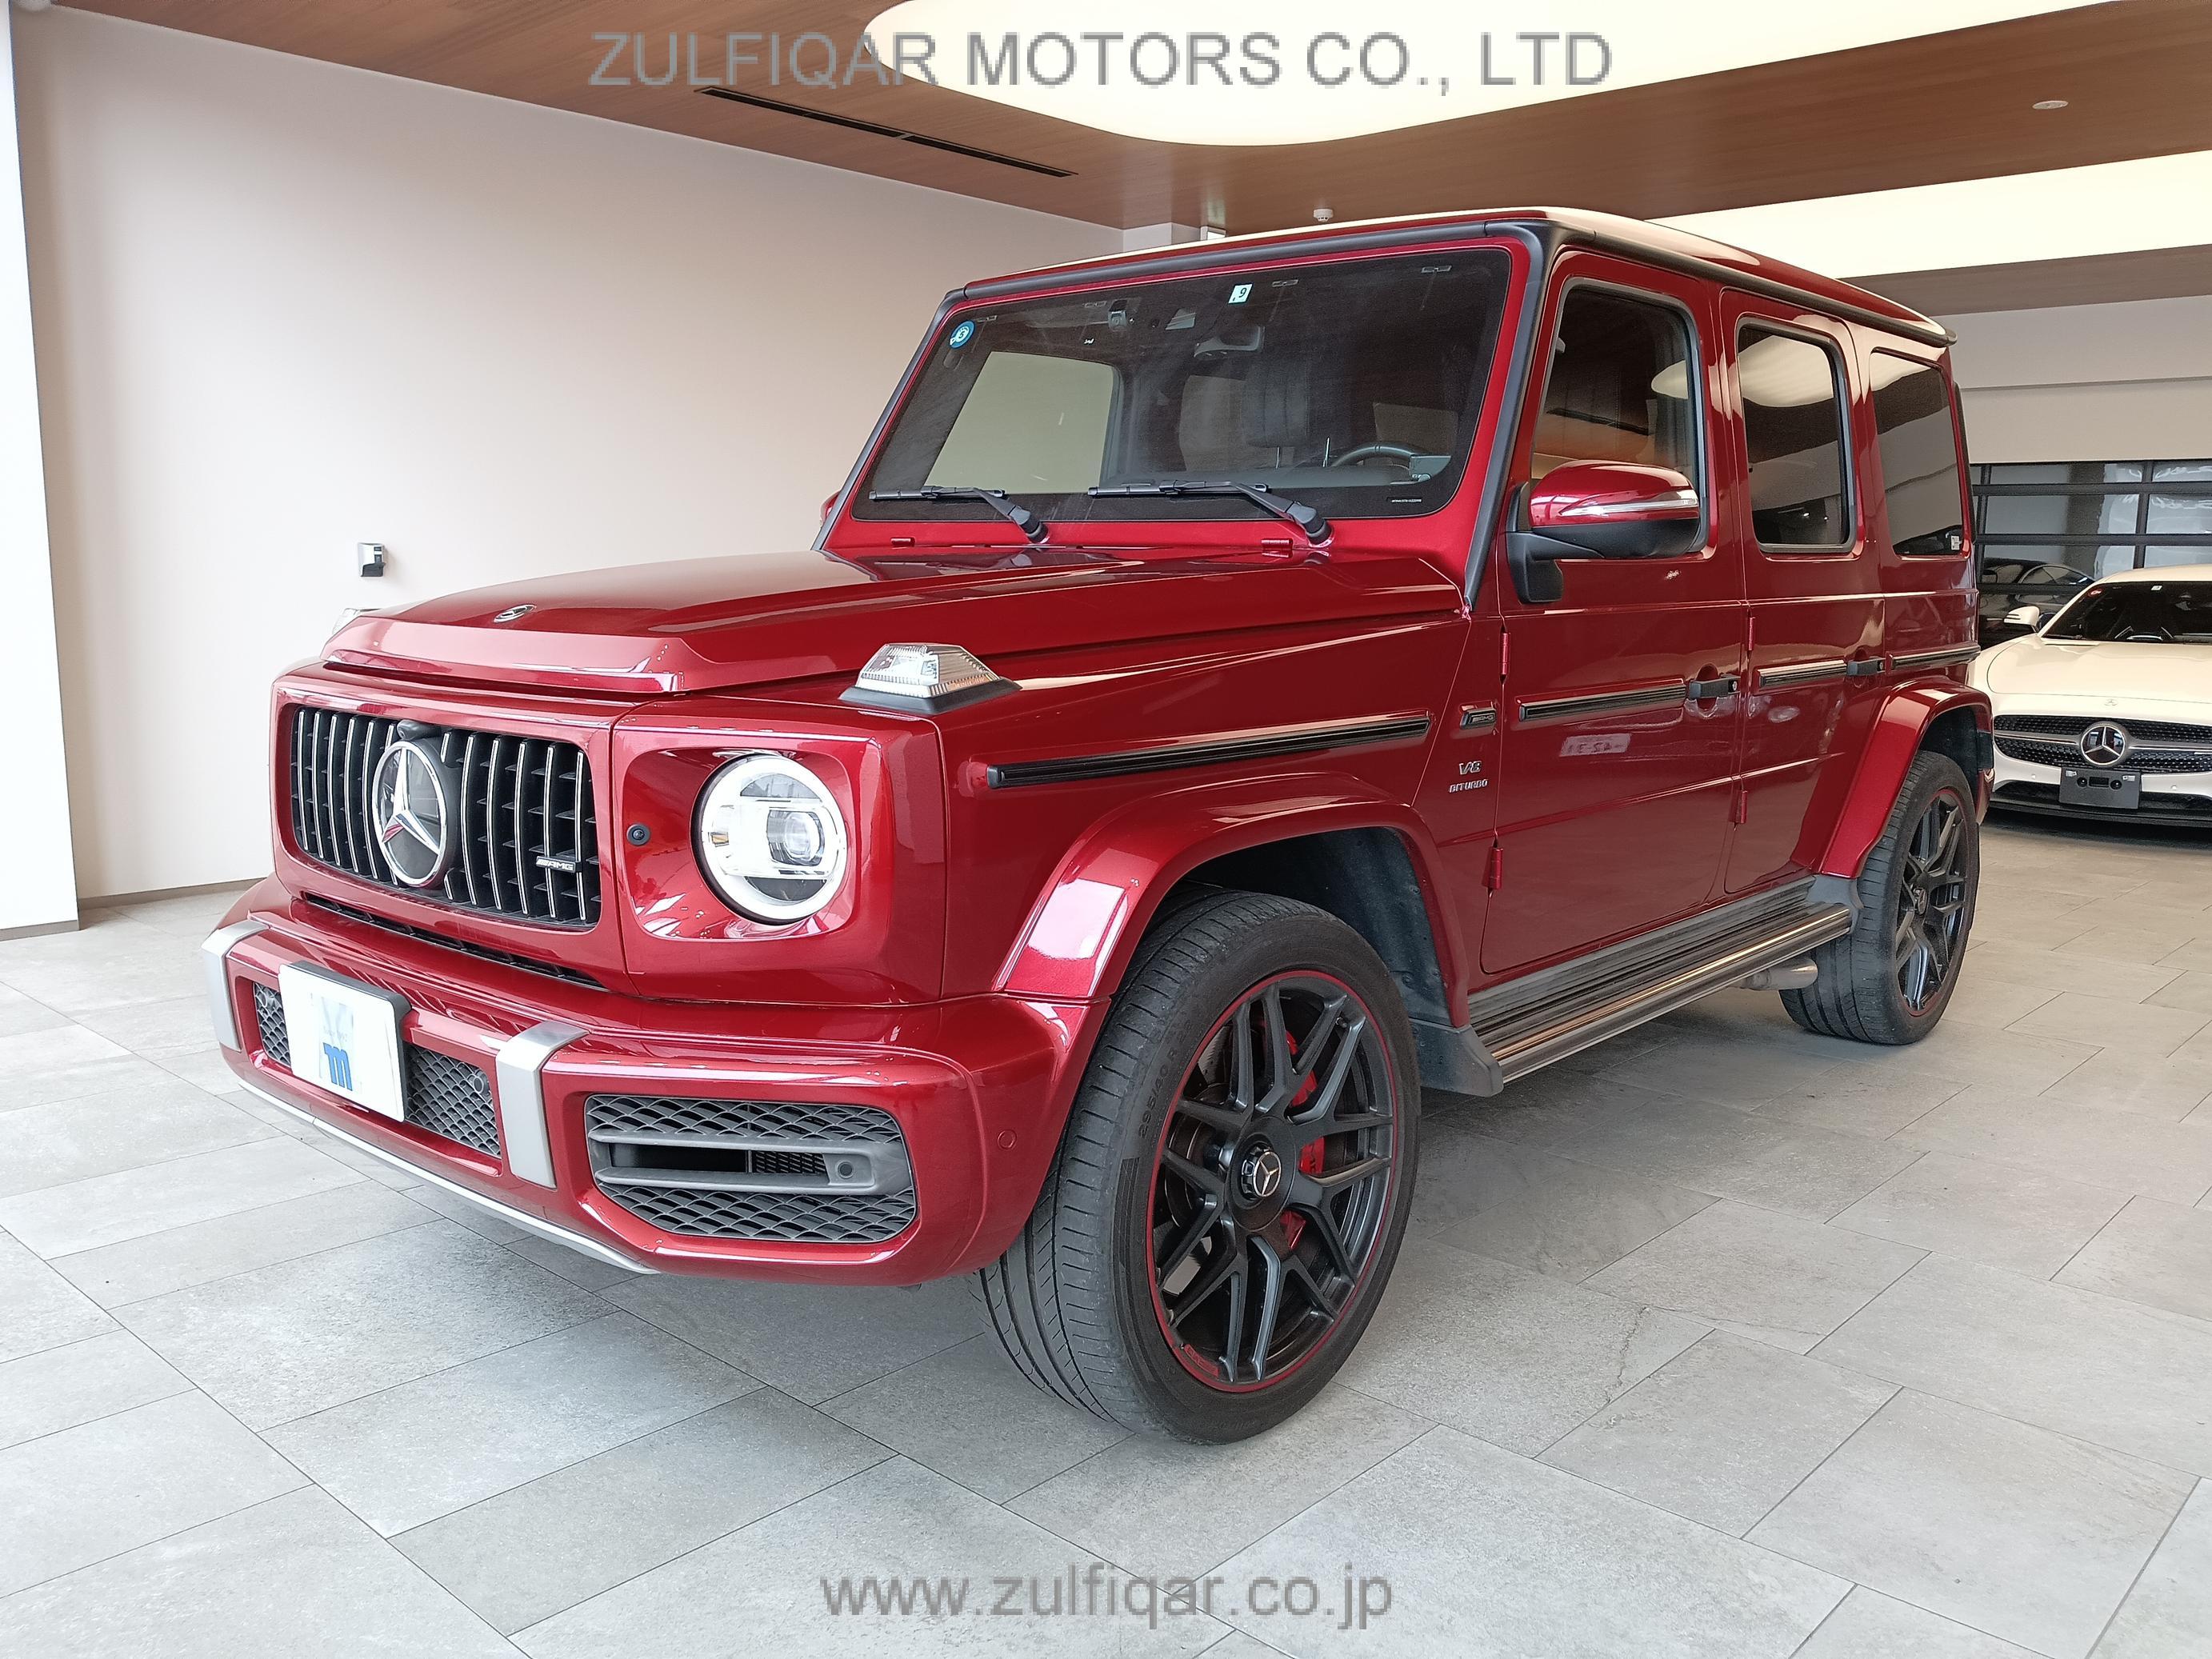 MERCEDES AMG G CLASS 2019 Image 3